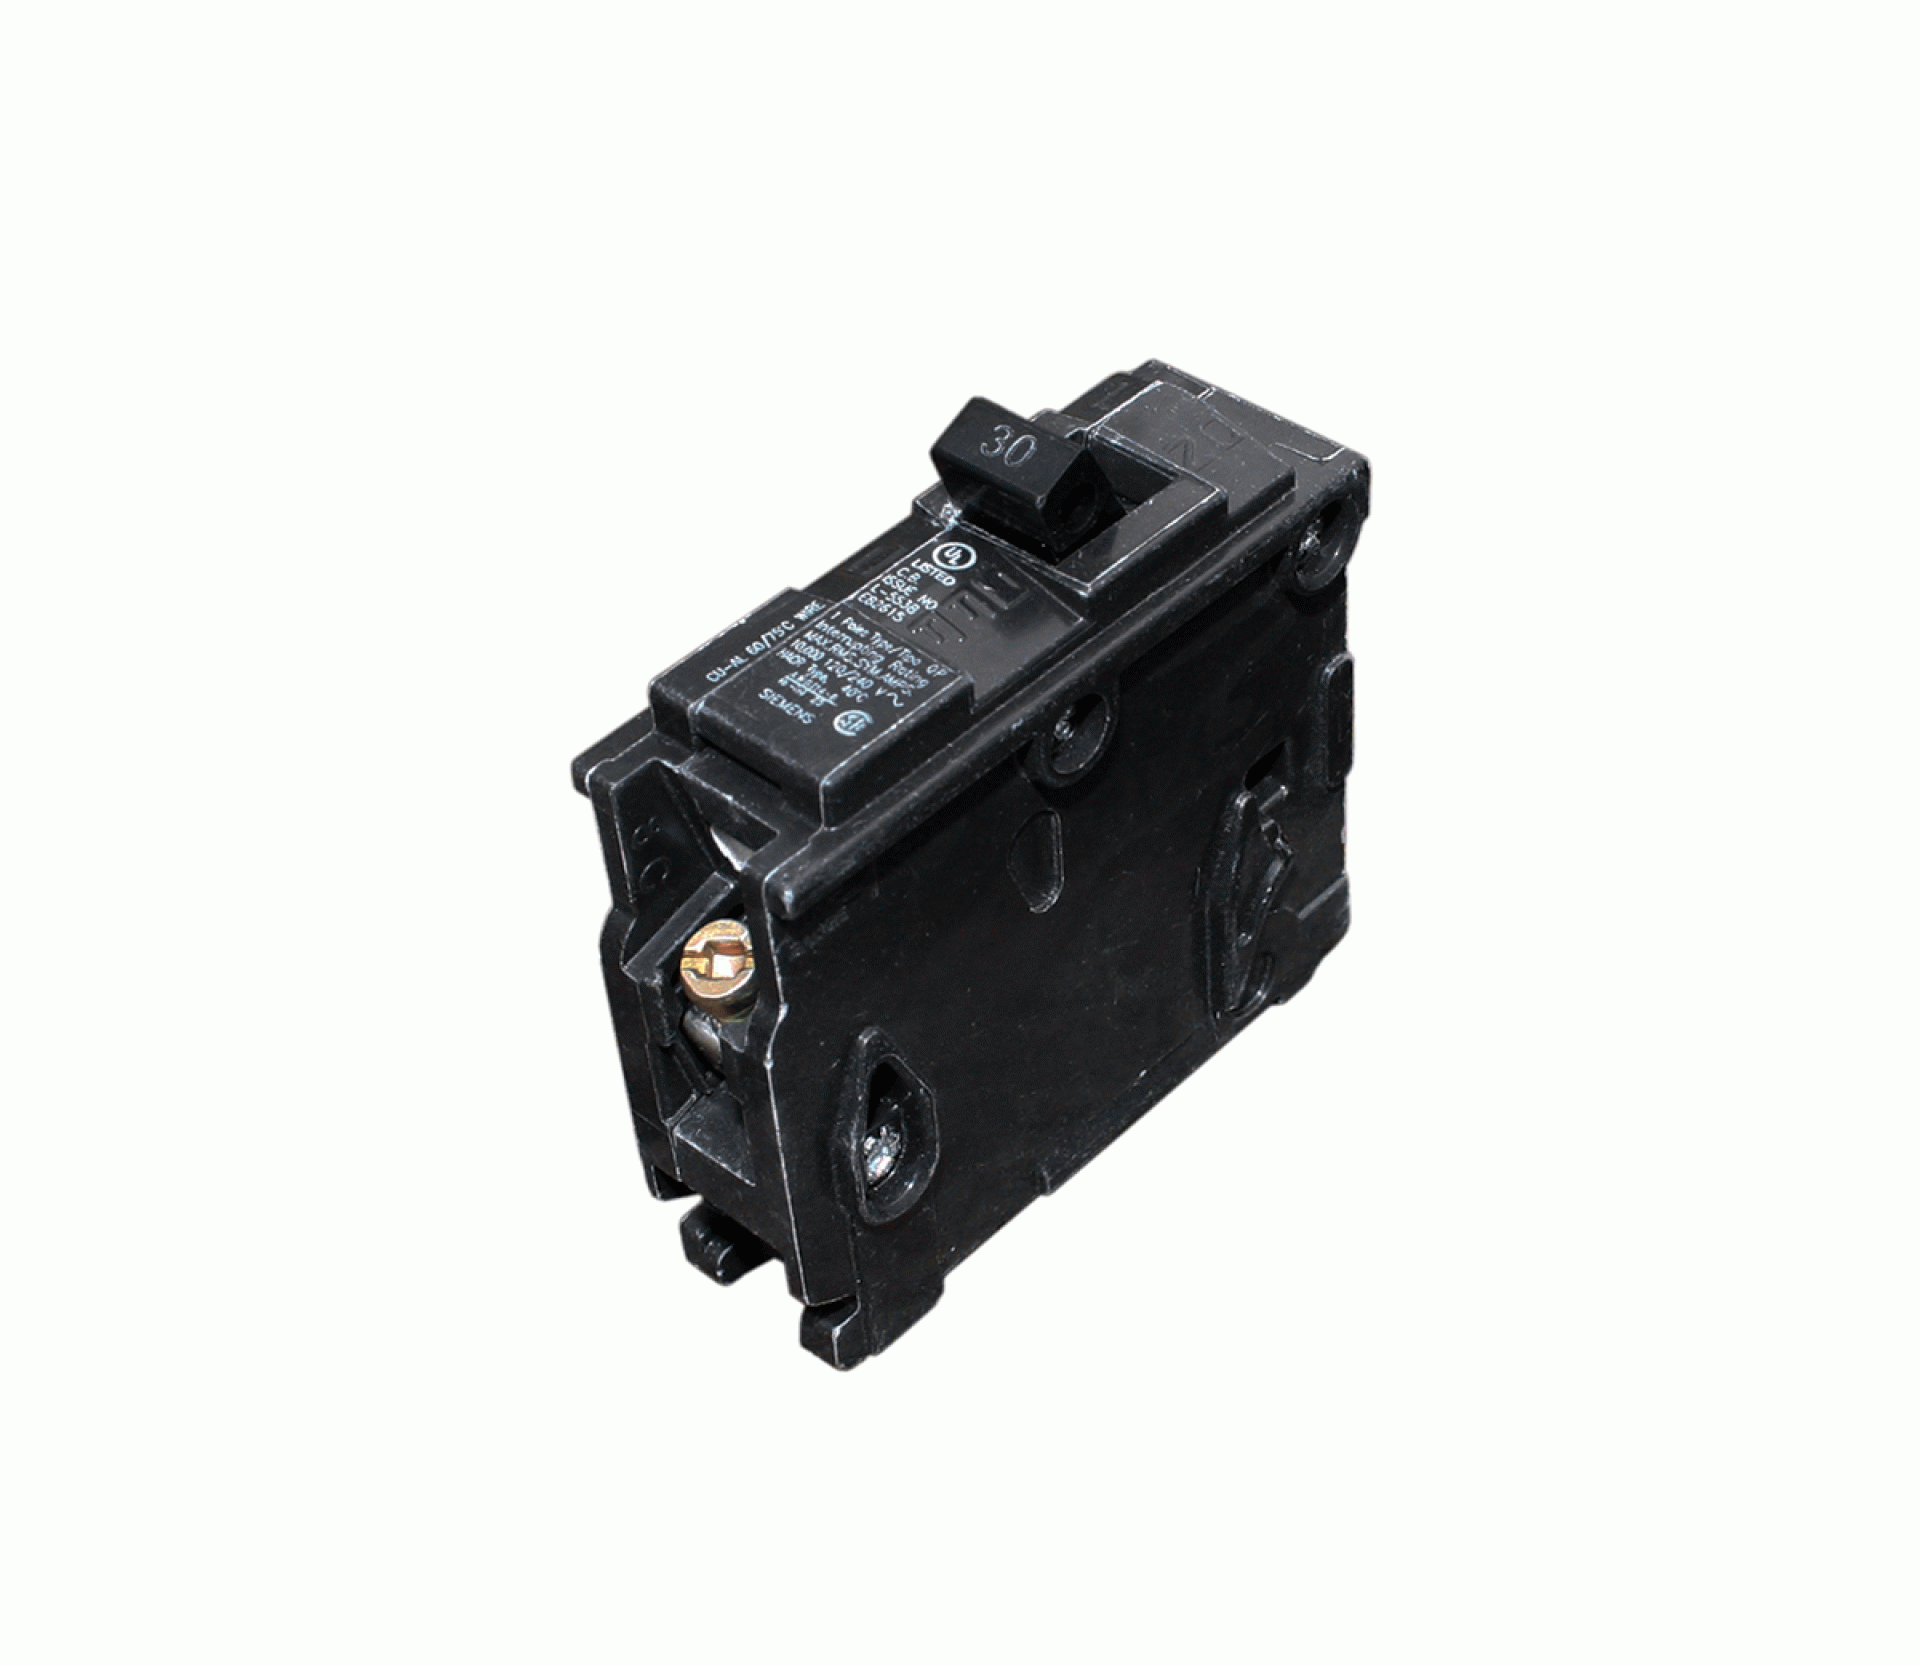 PARALLAX POWER SUPPLY | ITEQ130 | CIRCUIT BREAKER - One Pole - 30 AMP